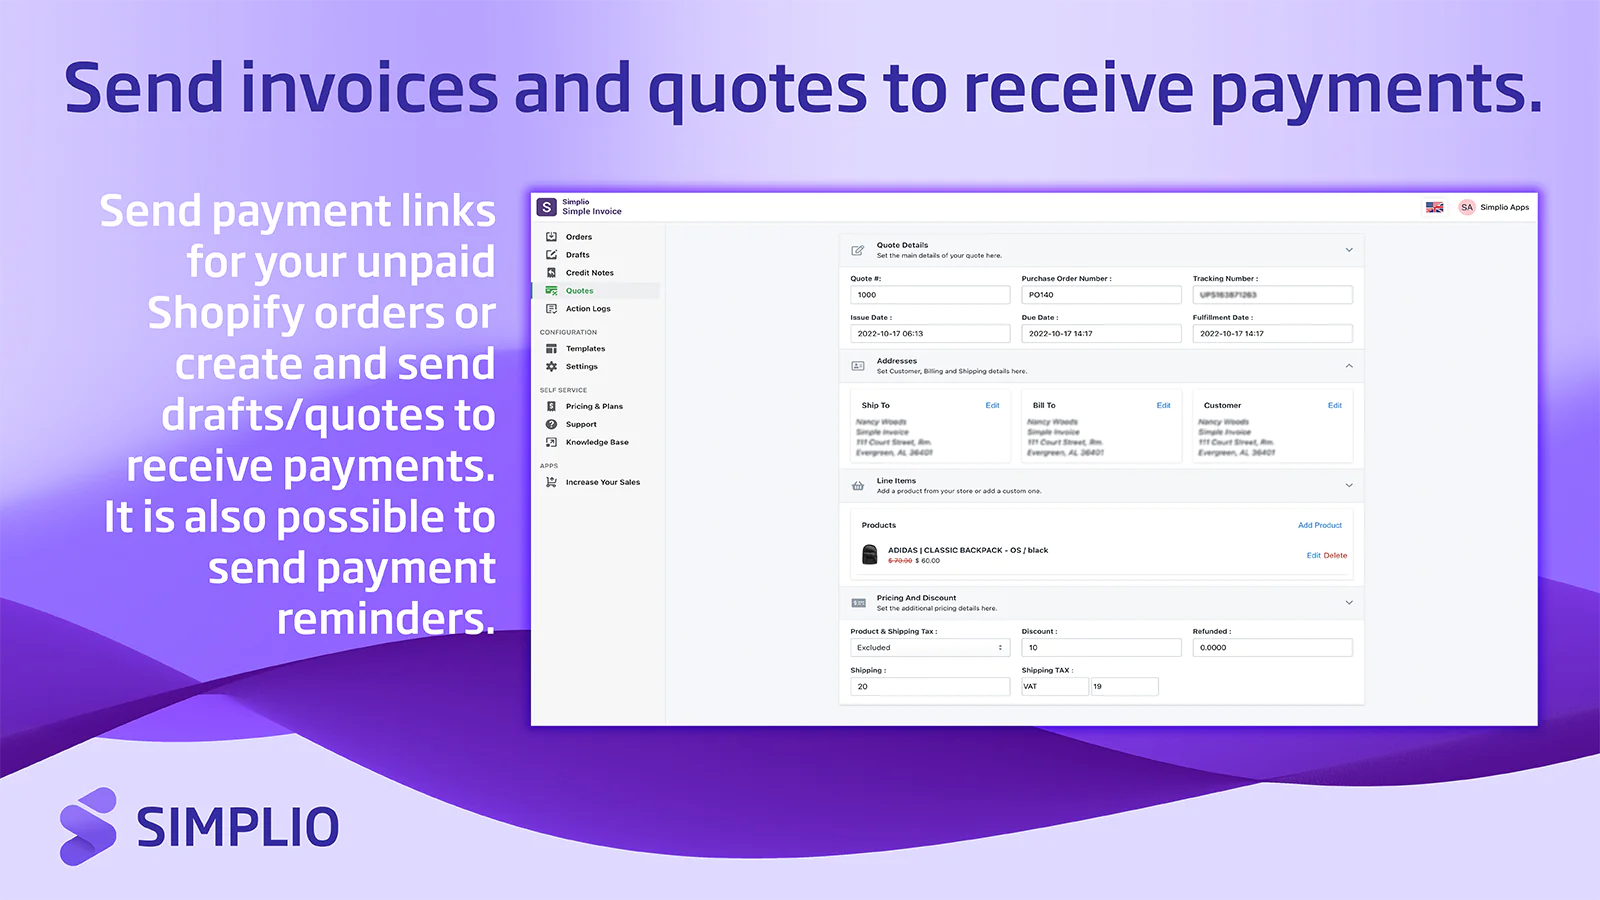 Send invoices and quotes to receive payments.